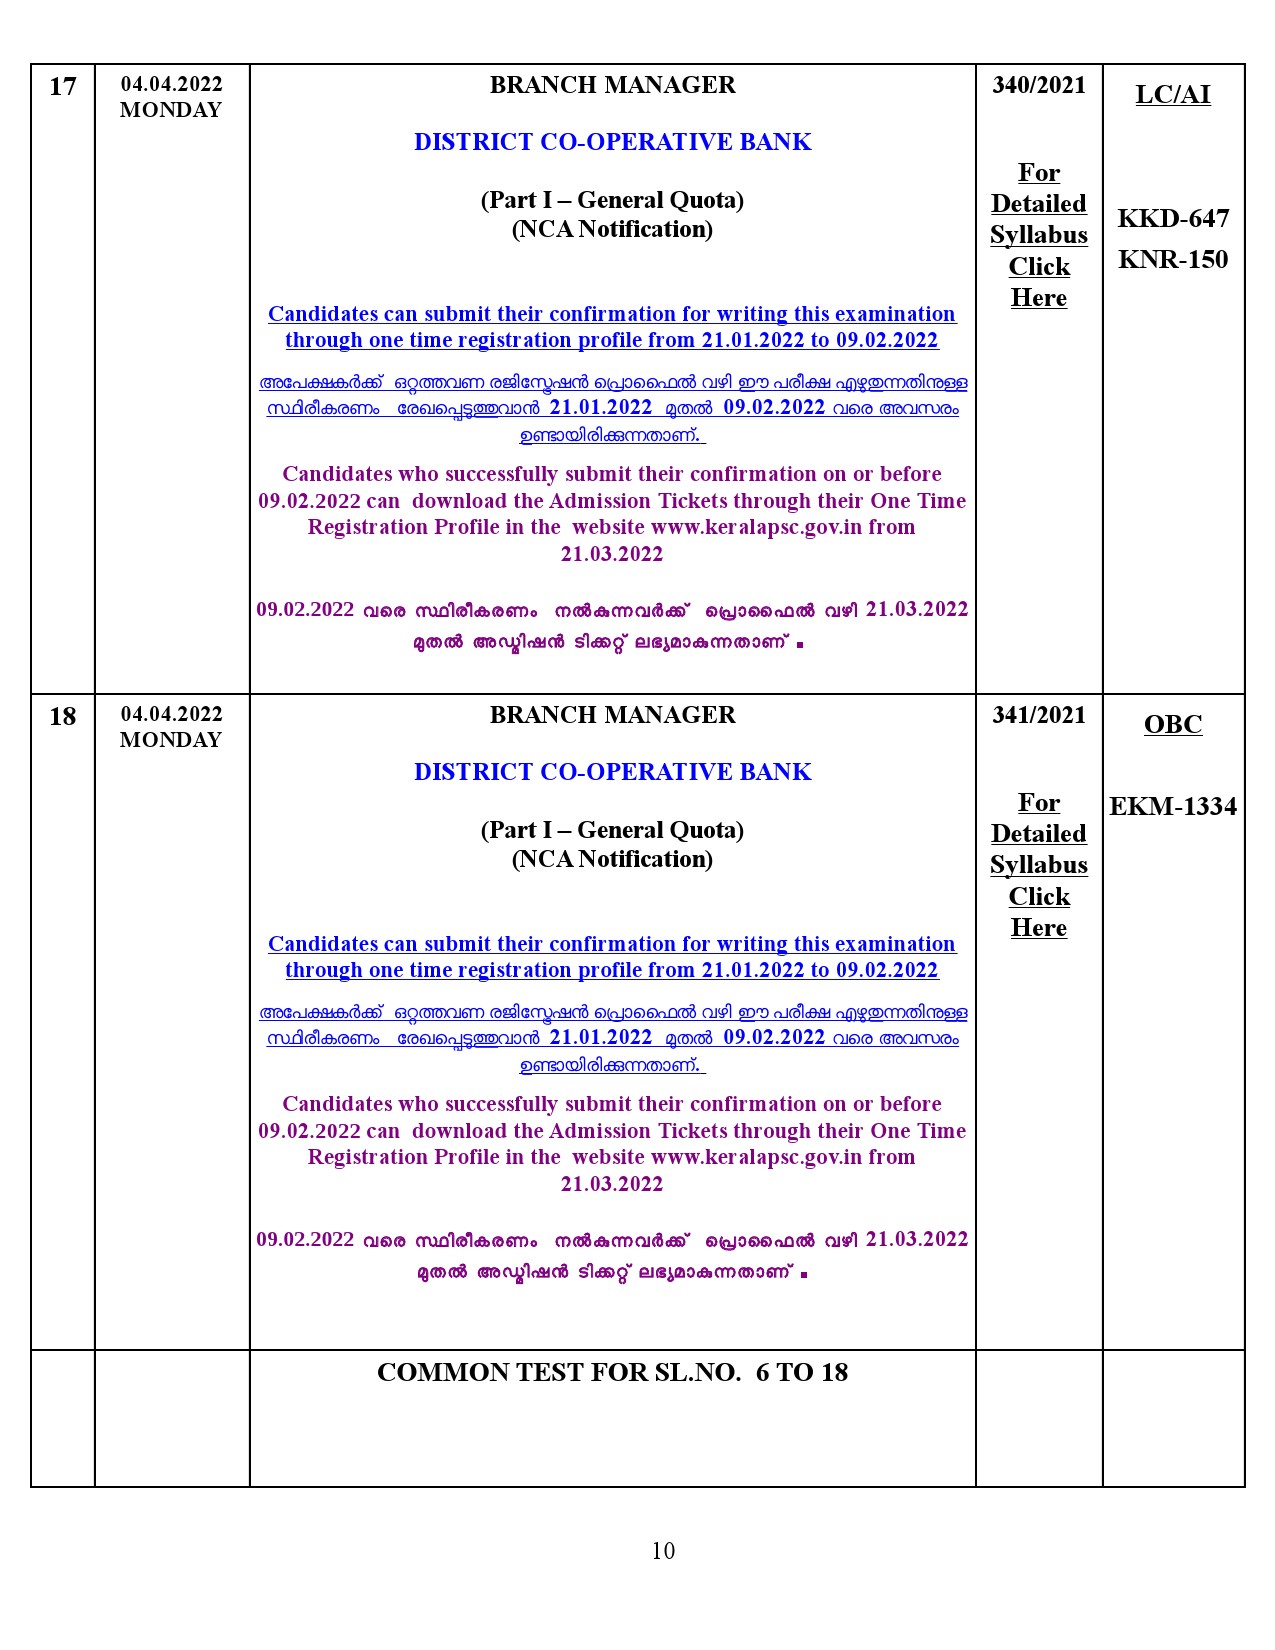 Examination Programme For The Month Of April 2022 - Notification Image 10